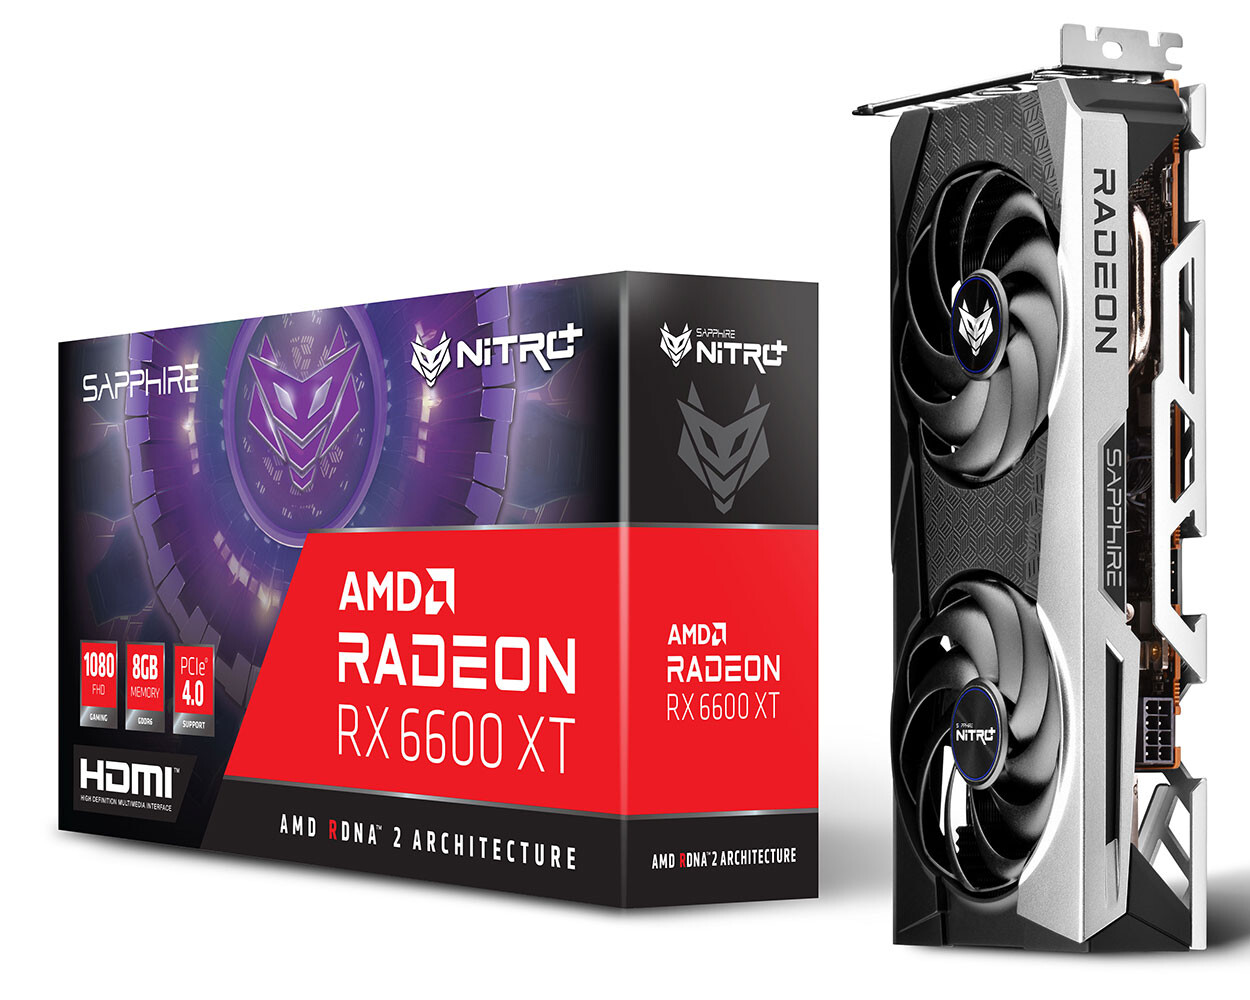 Sapphire released the new Radeon RX 6600 XT graphics card 